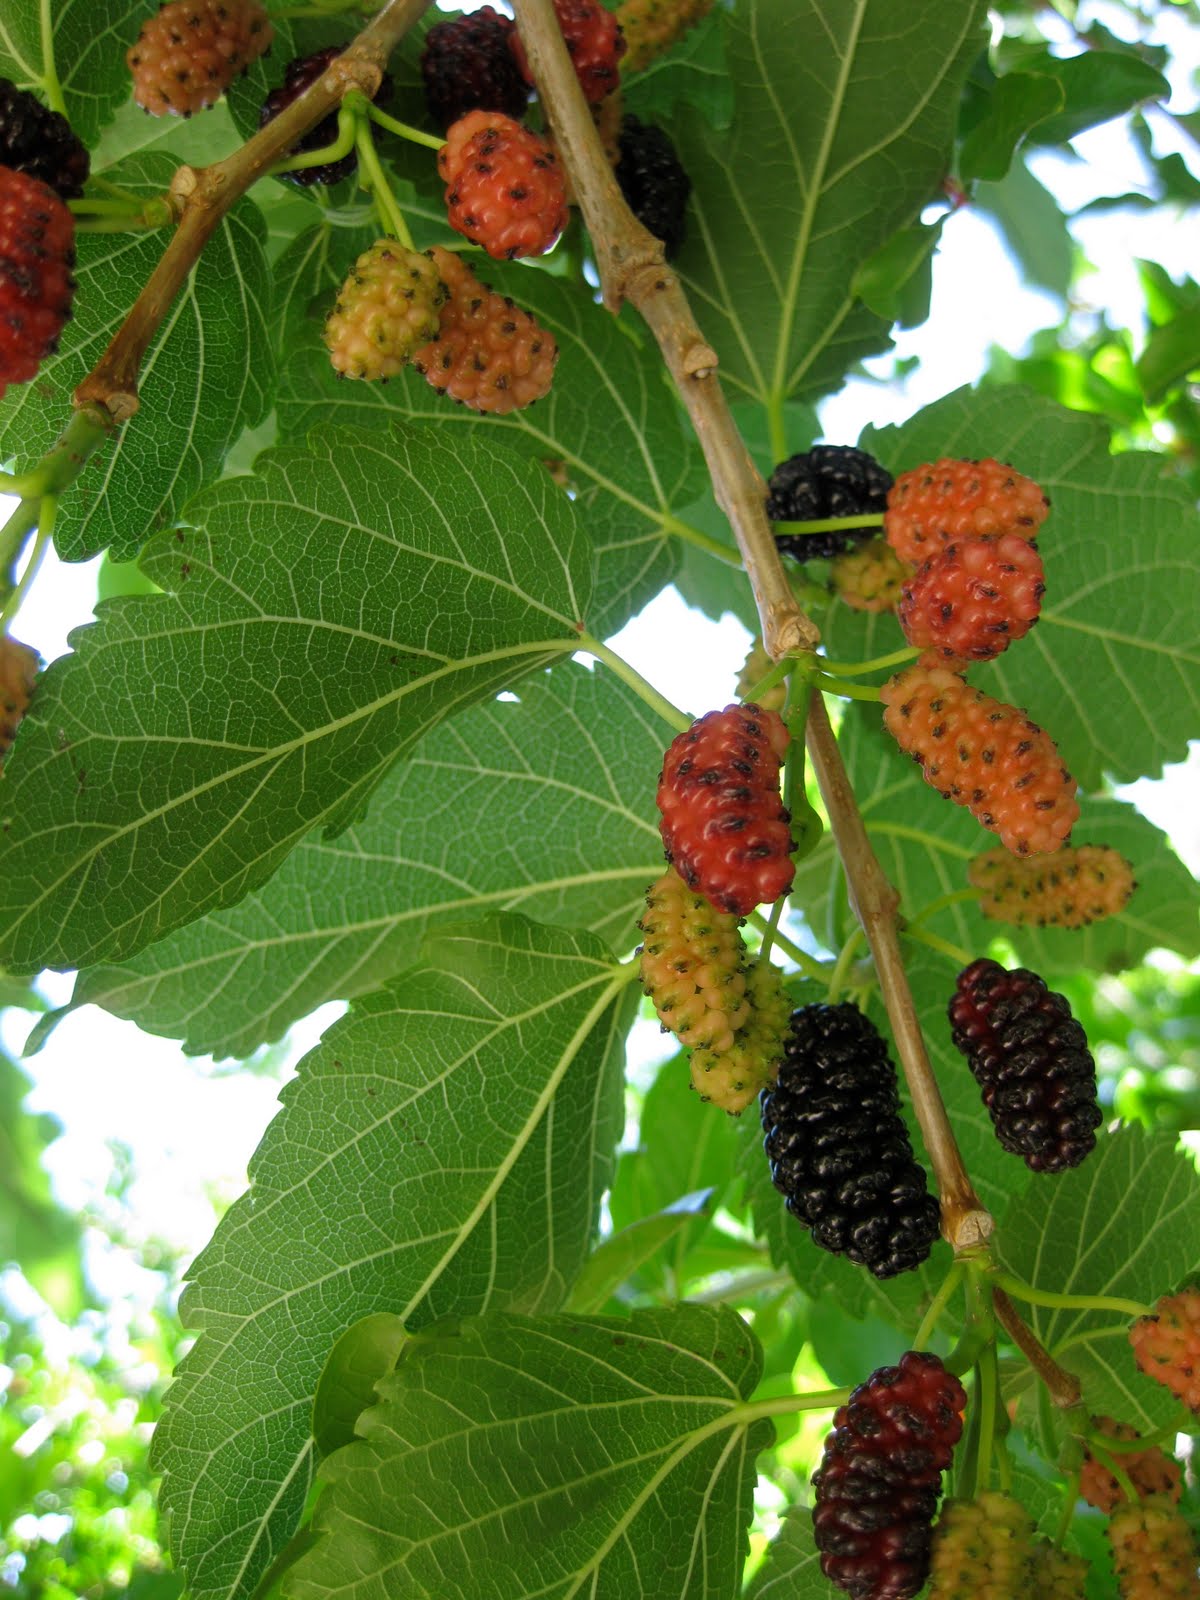 Mulberry “Picking”